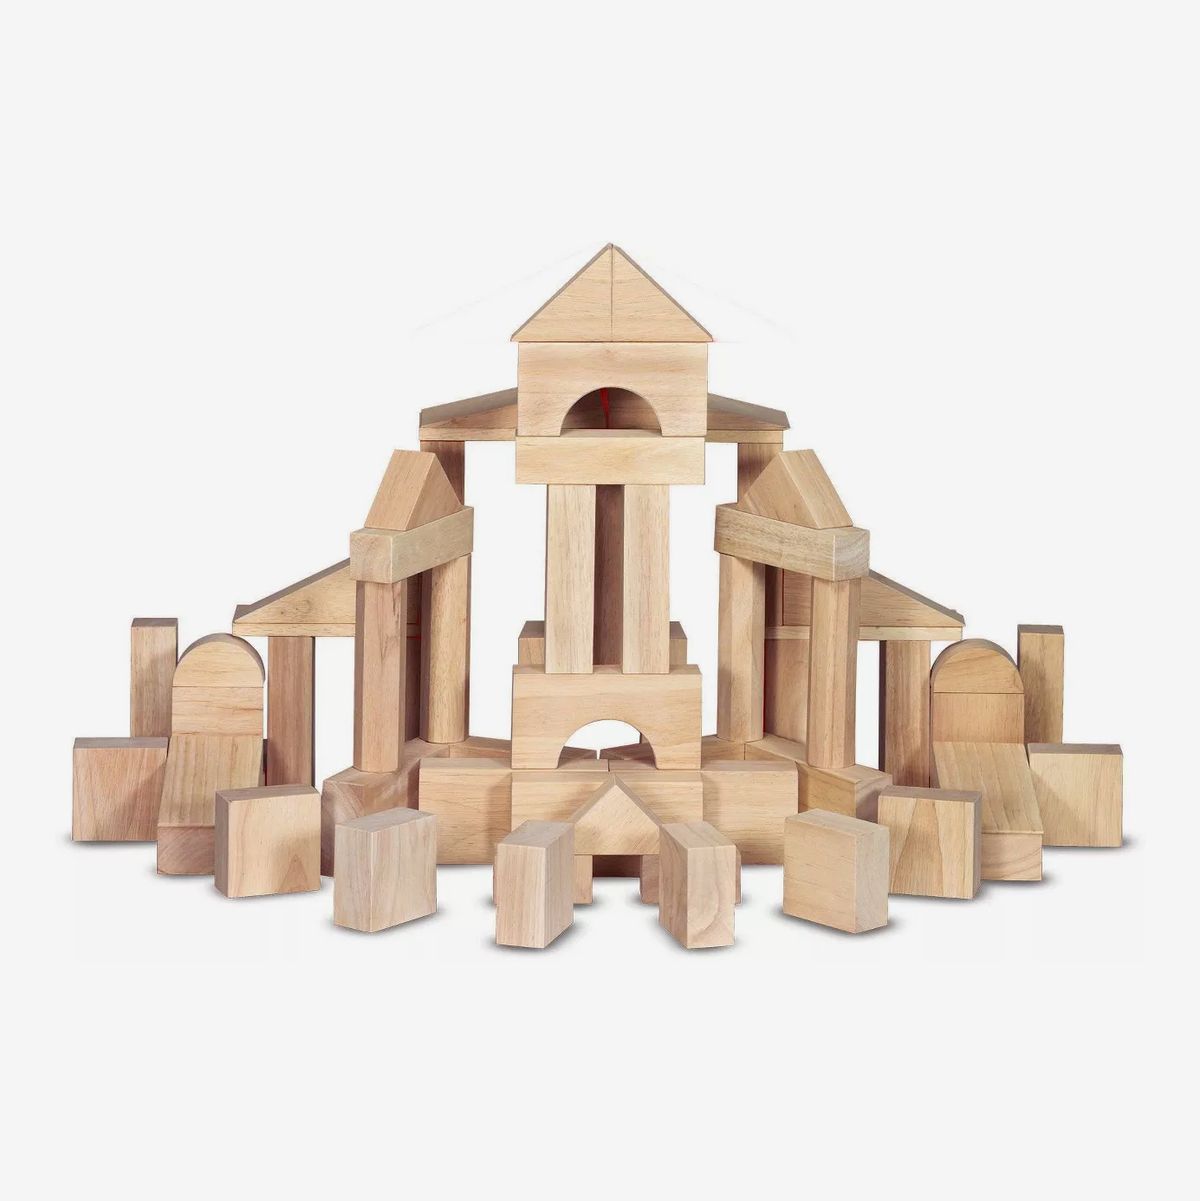 120 Pieces Todder Wooden stackings Educational Toy Set with 10 Color Geometric Shapes 6 Figures for Baby Pre School Learning kidus Wooden Building Blocks for Toddlers 1-3 3-6 